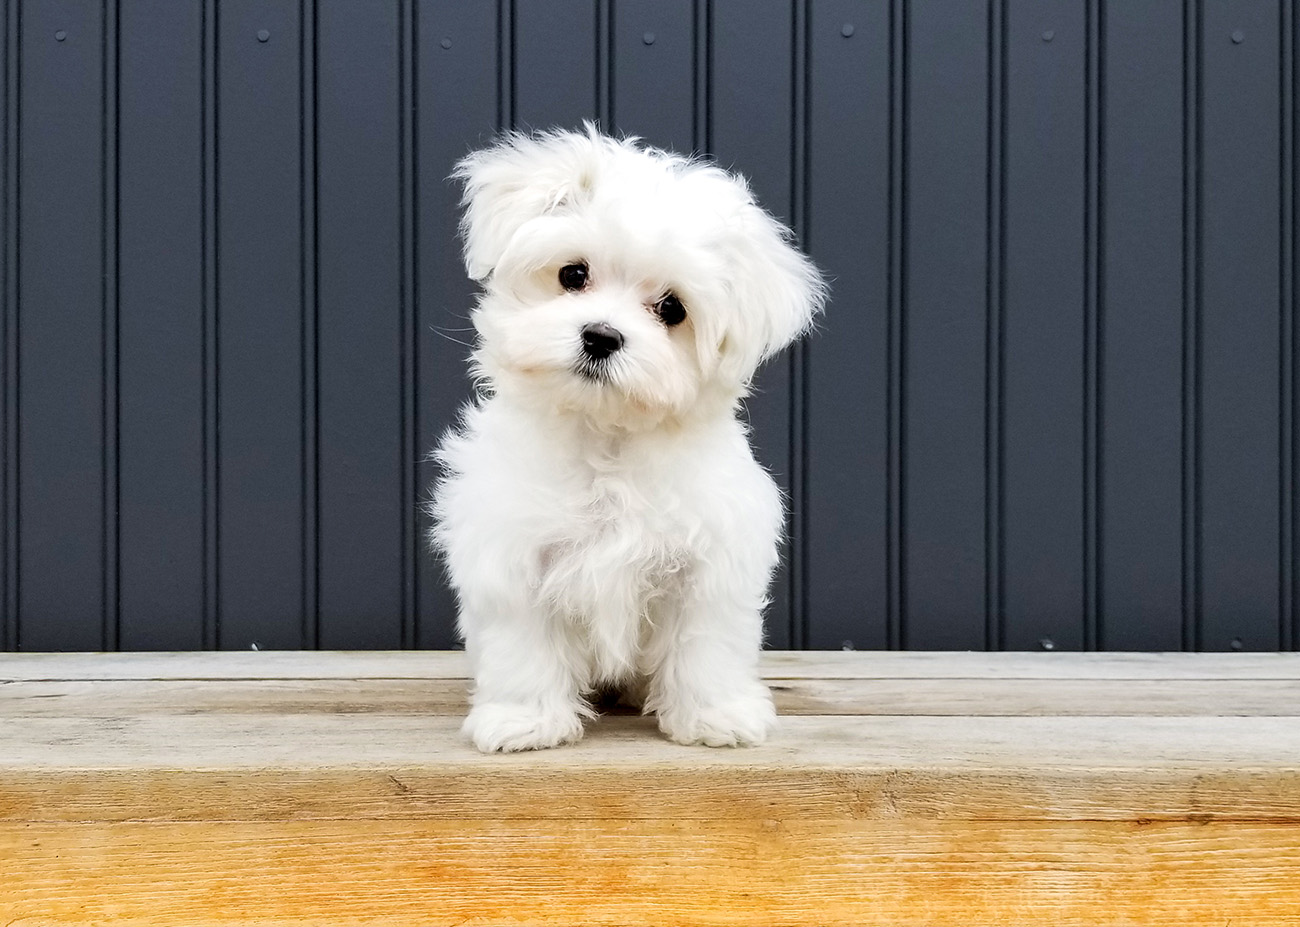 10 interesting puppy facts